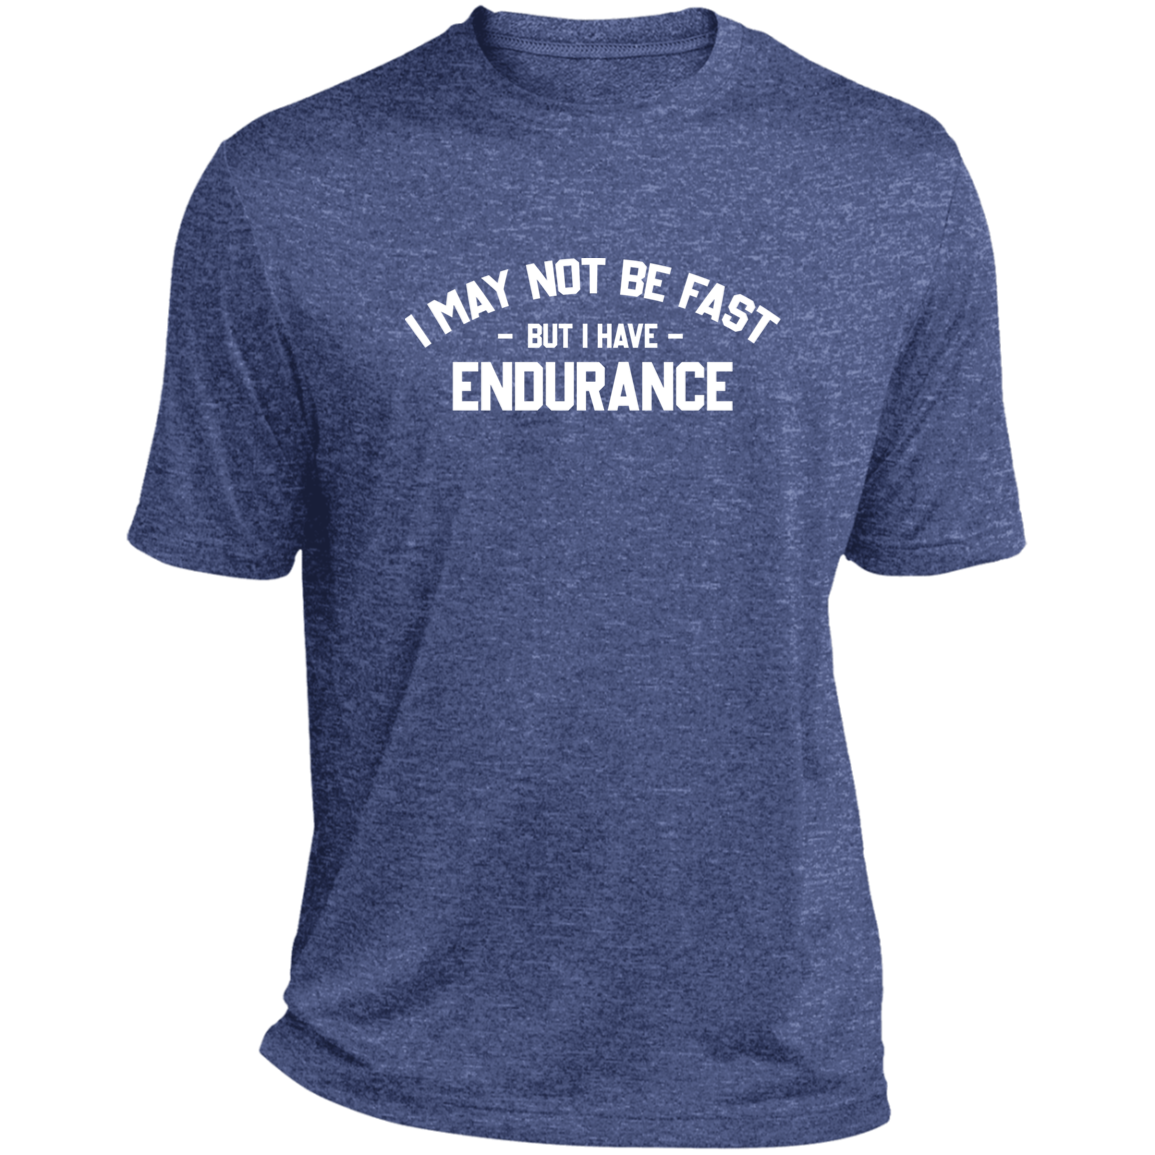 I may not be fast (shirt of the month)